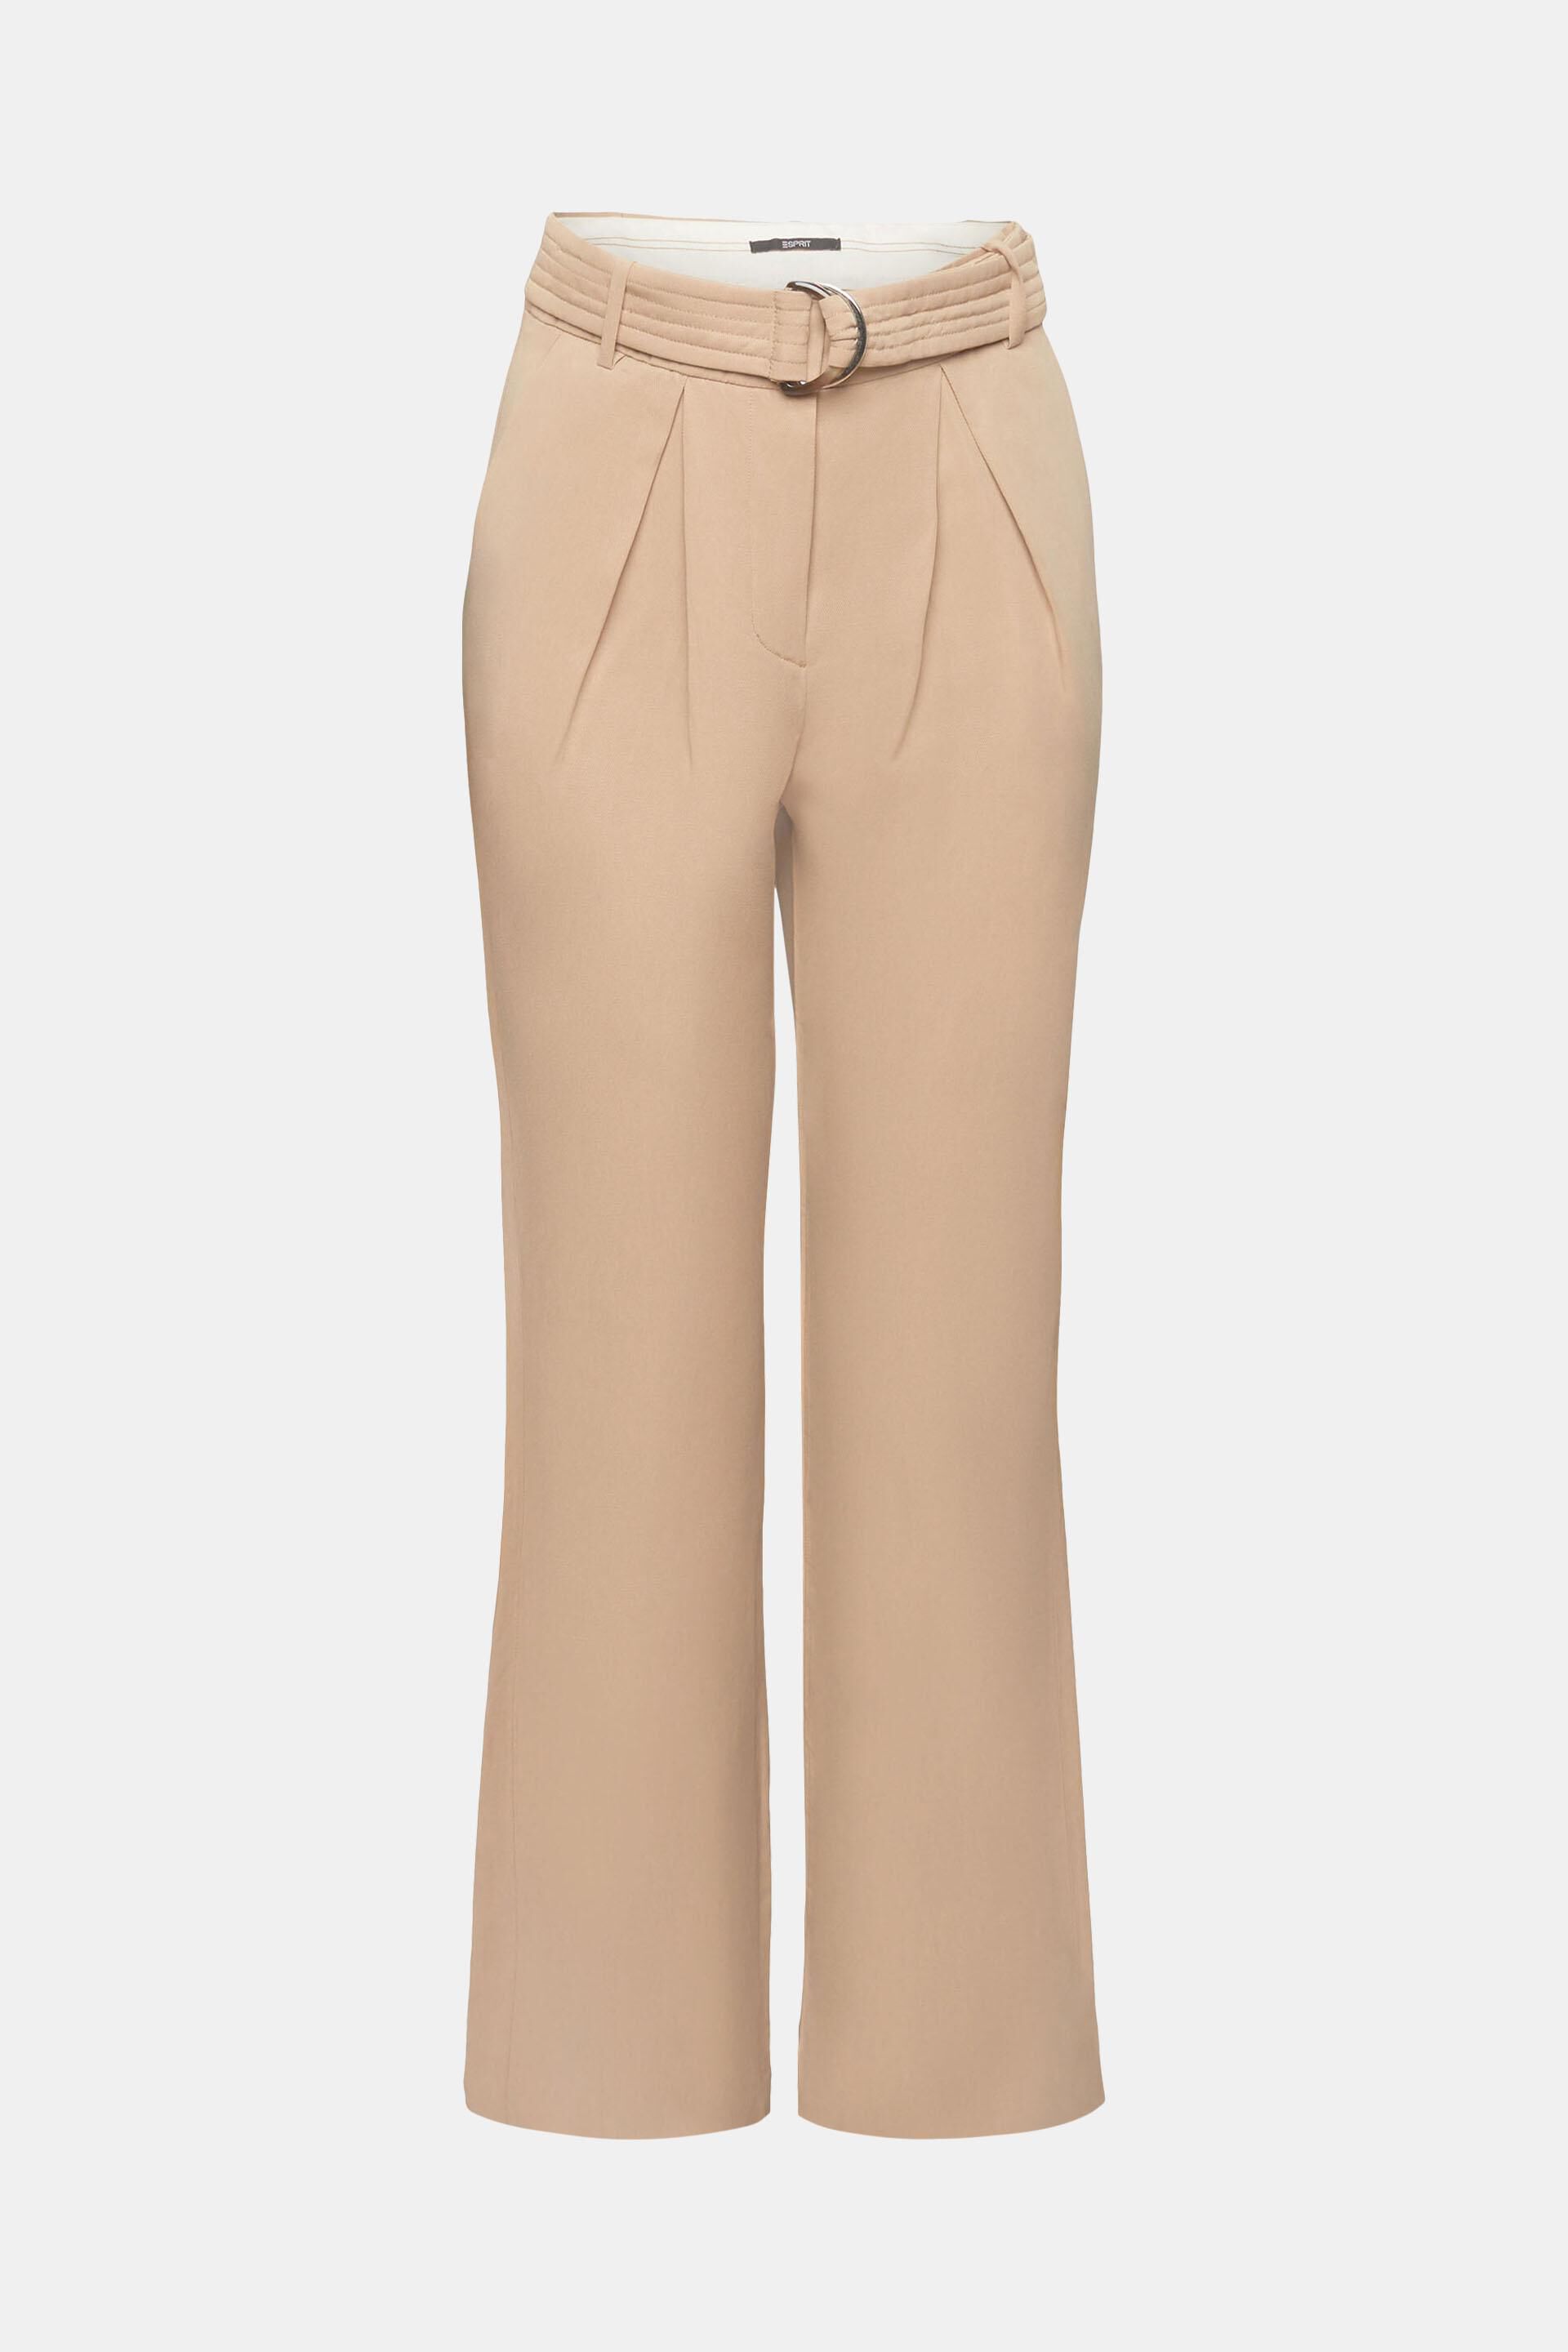 Bright Pink Linen Blend Formal Wide Leg Trousers | New Look